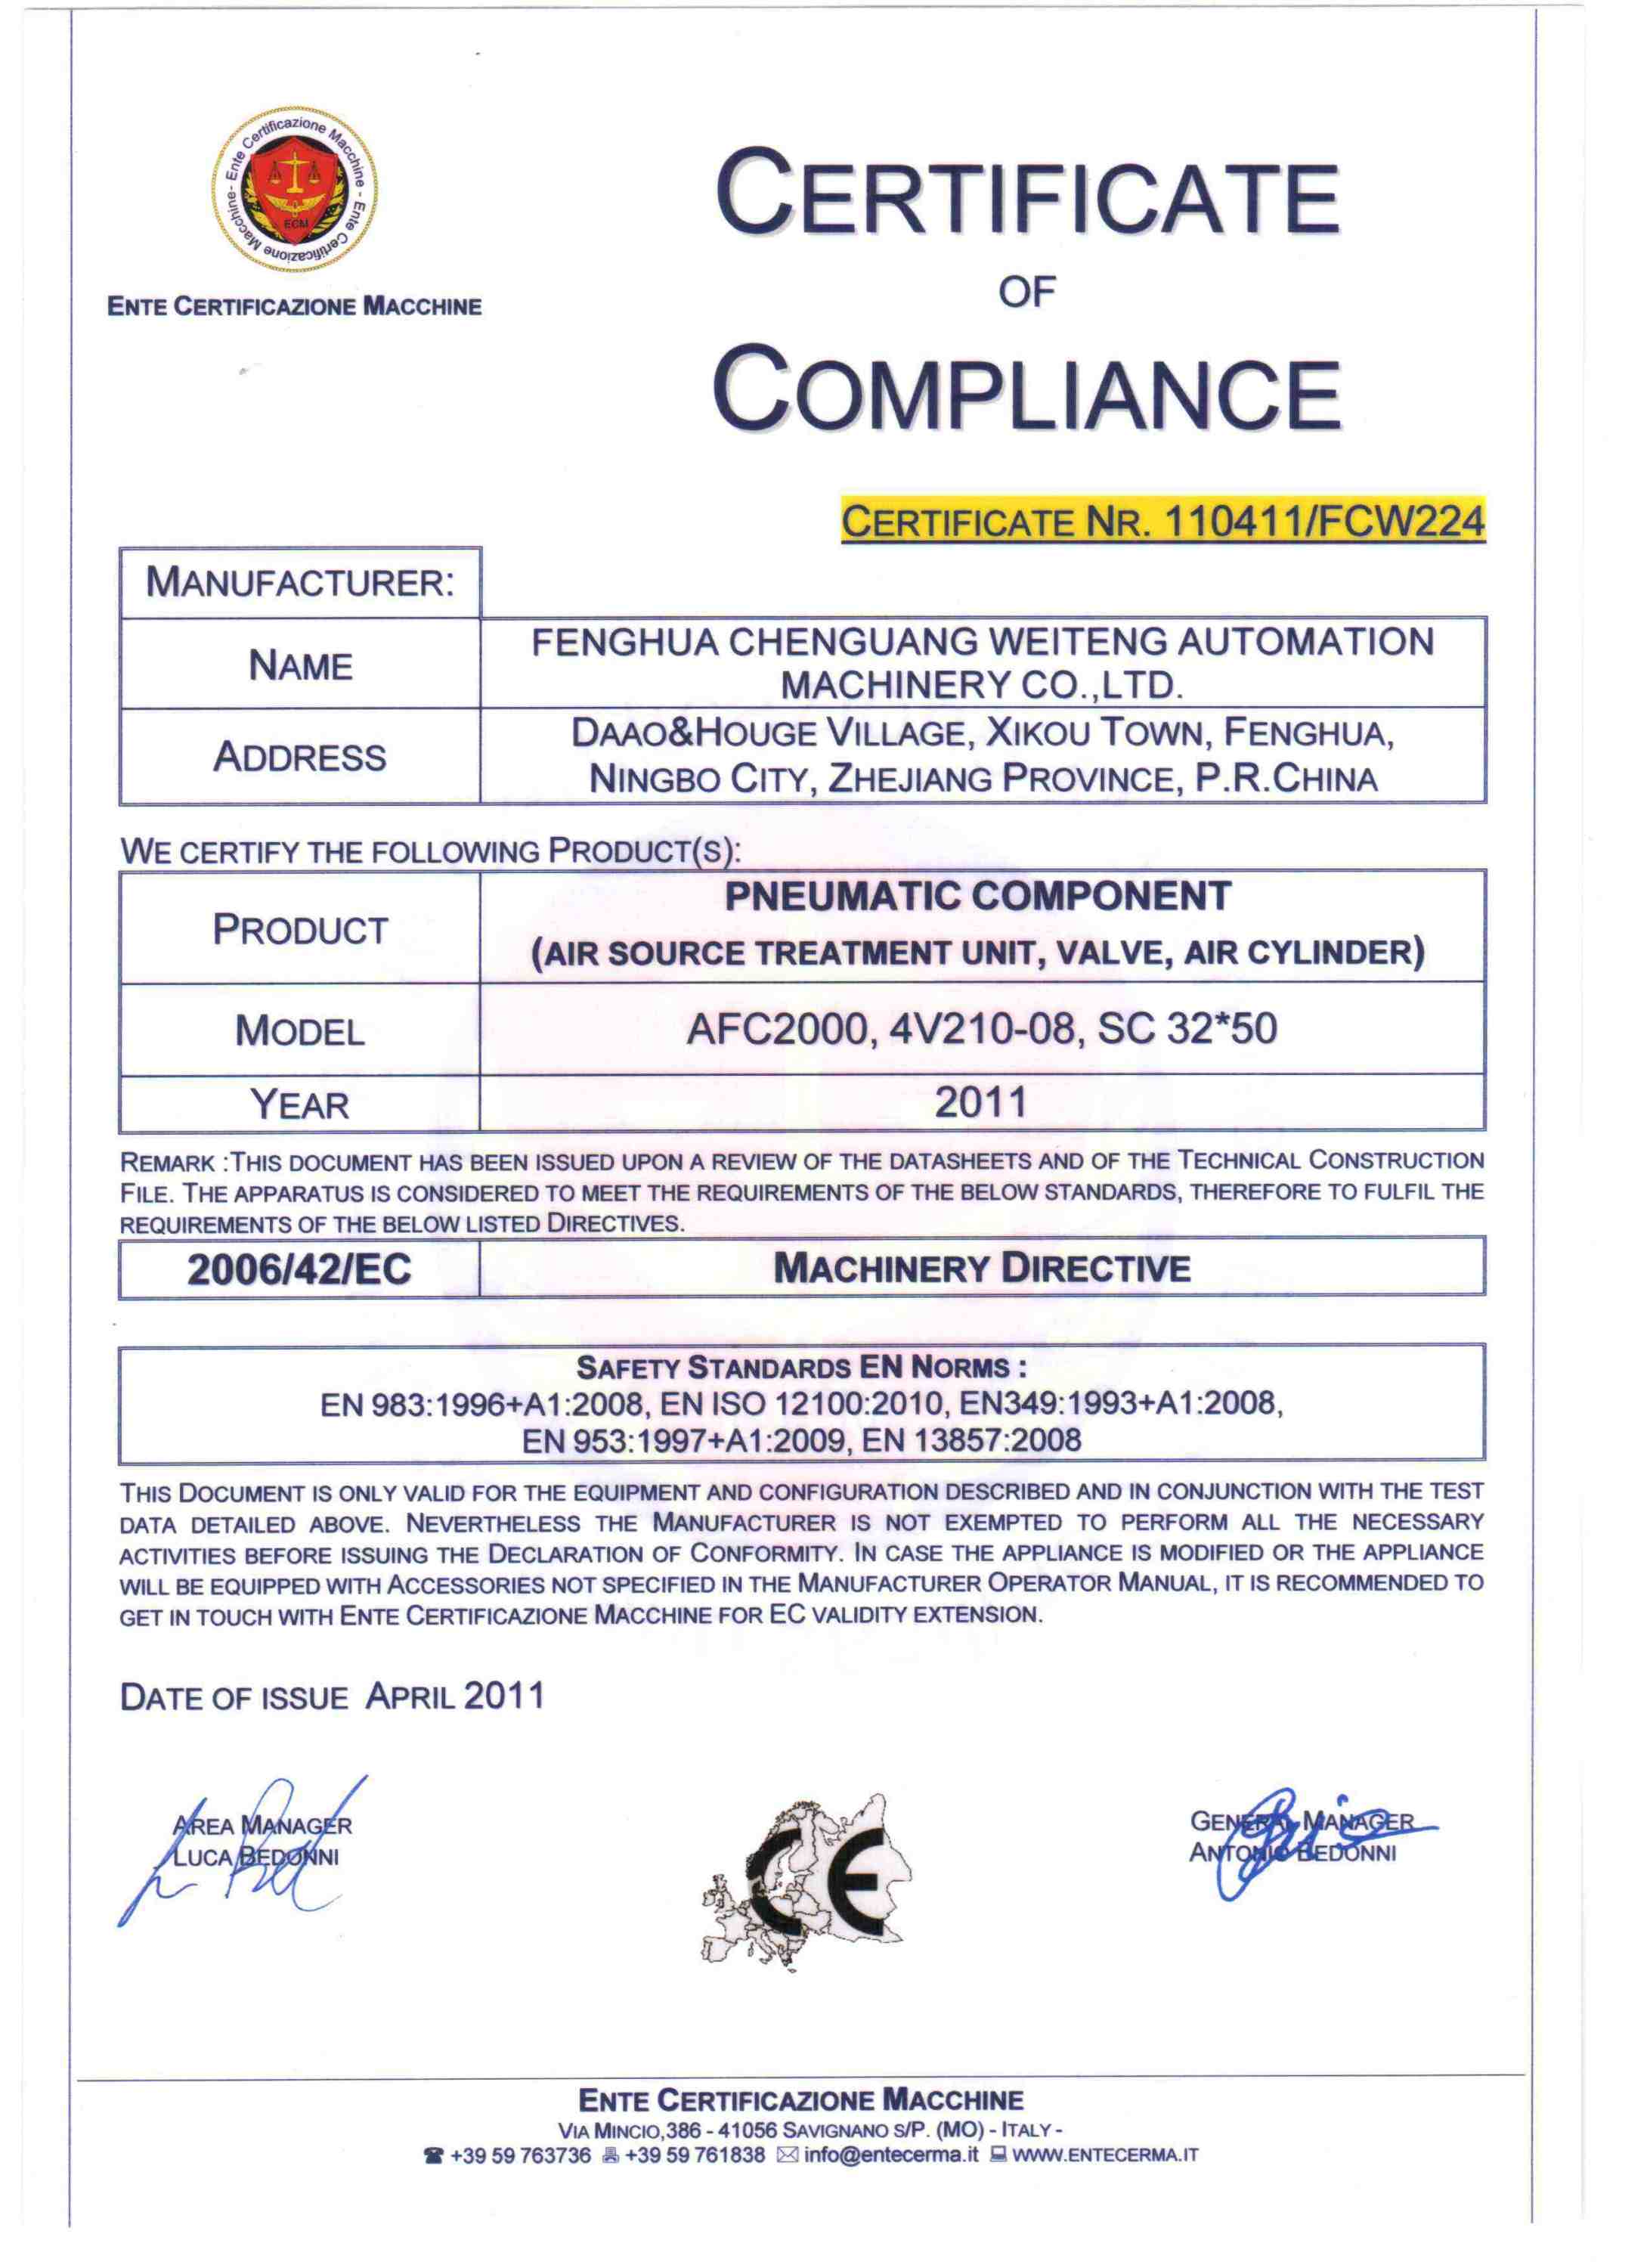 CE Certification - FengHua ChenGuang WeiTeng Automation Machinery Co.,Ltd.